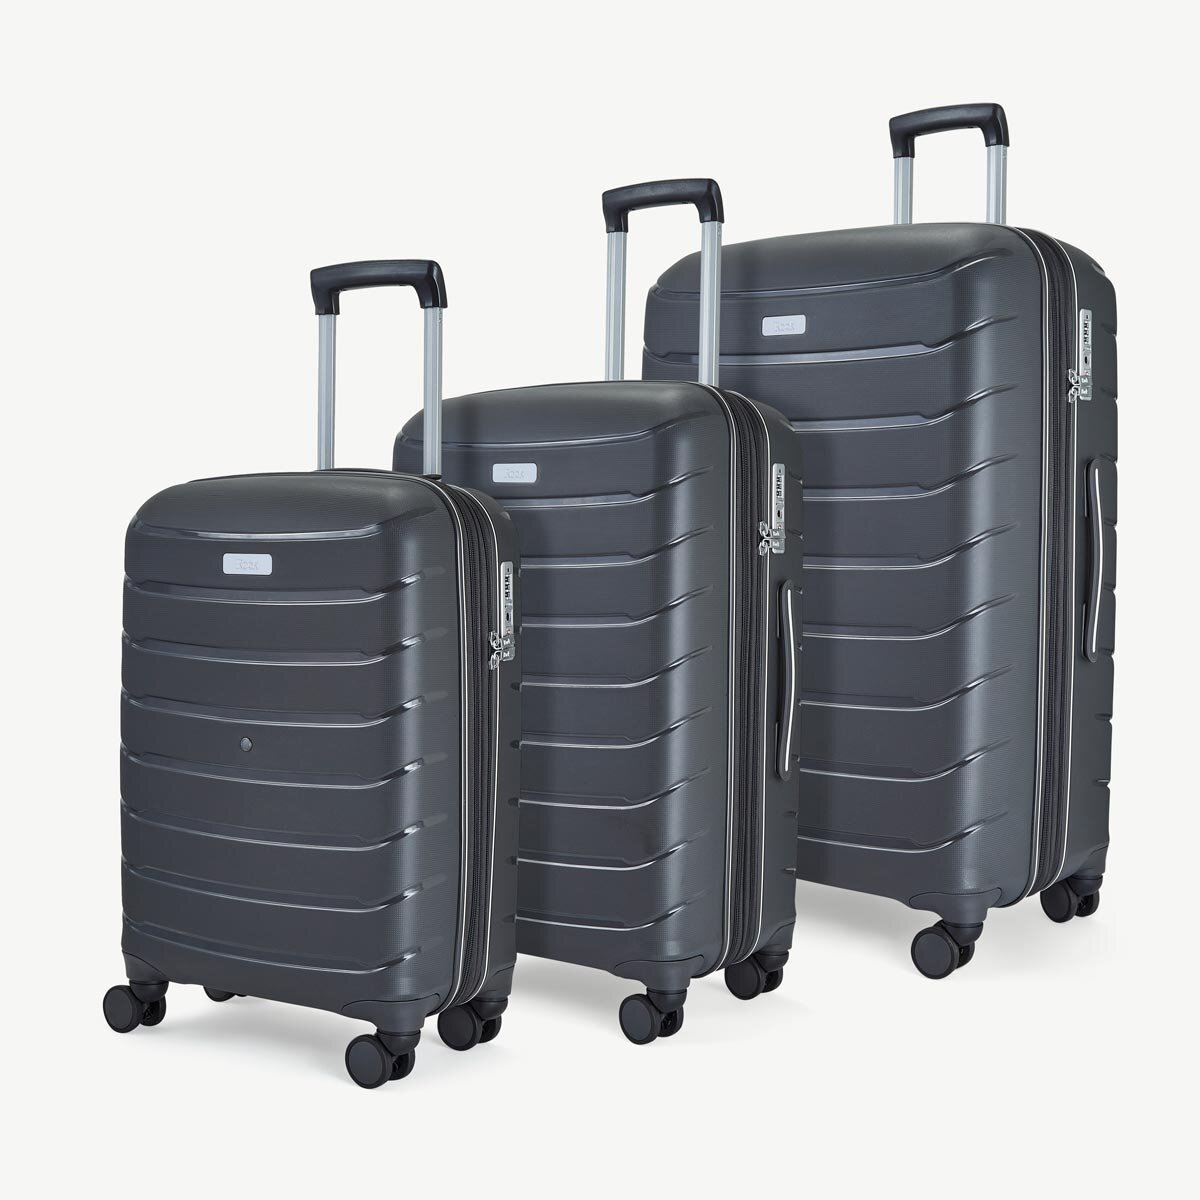 Rock Prime 3 Piece Hardside Luggage Set in 4 Colours | Co...